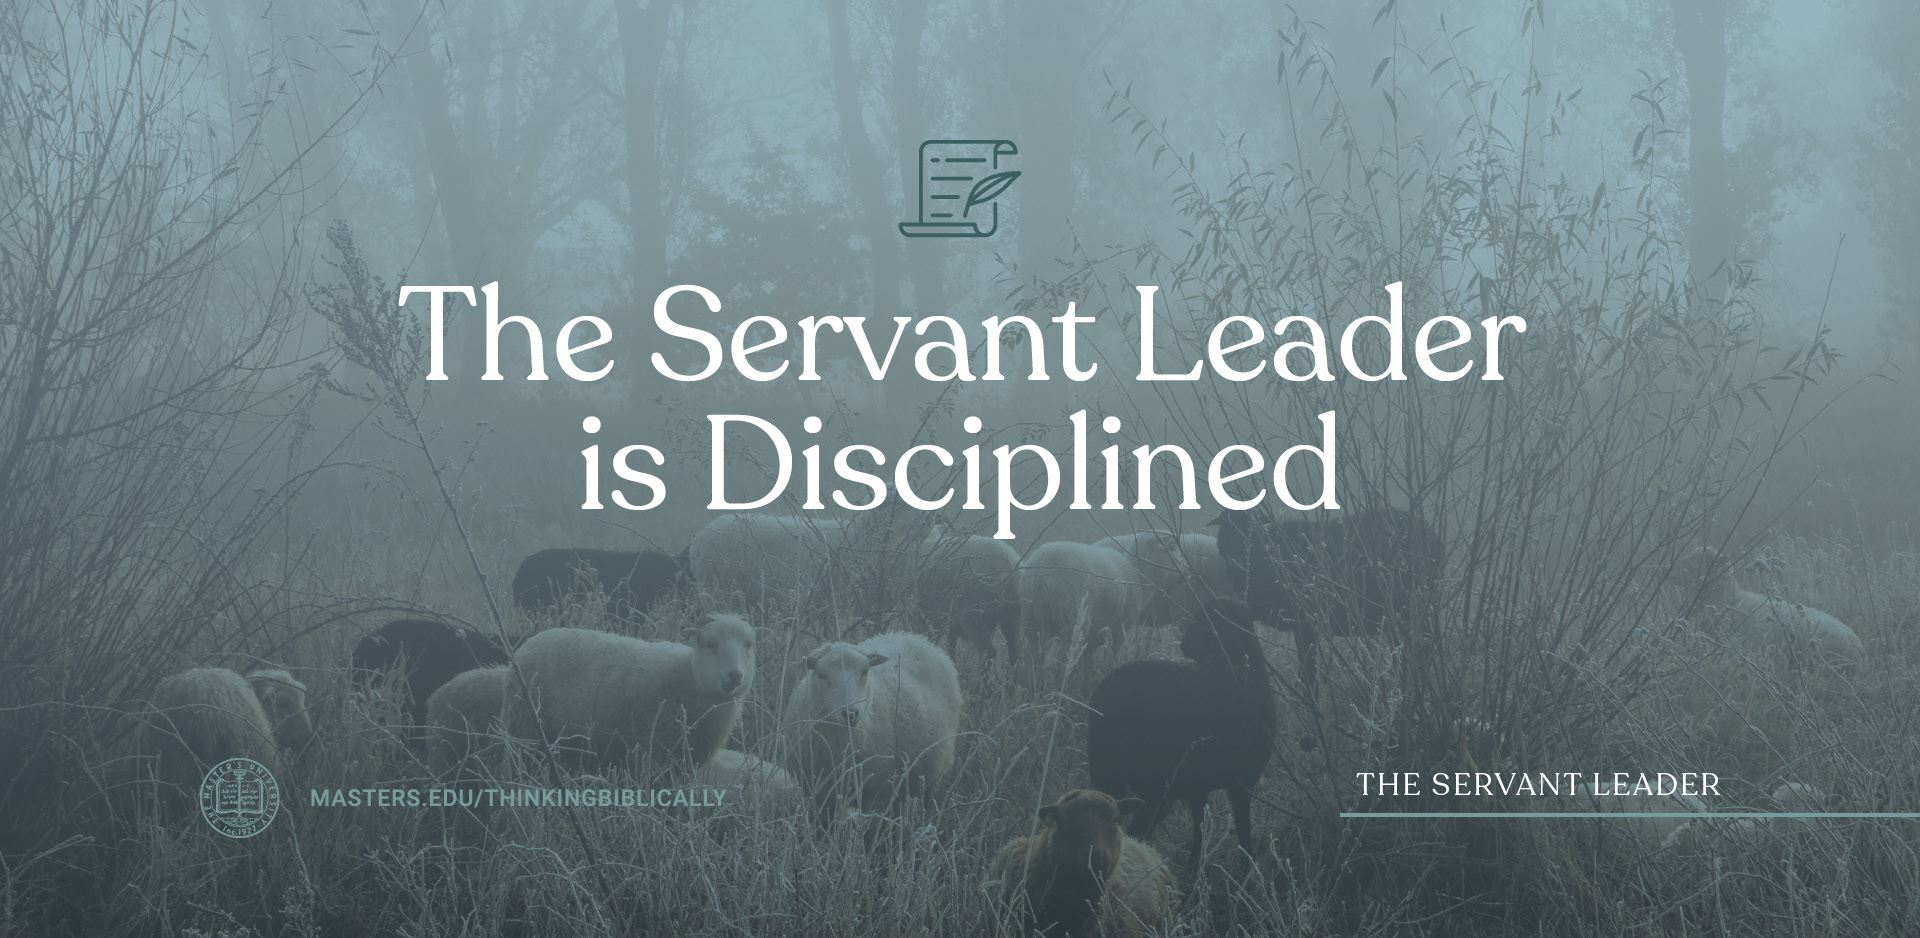 The Servant Leader is Disciplined Featured Image